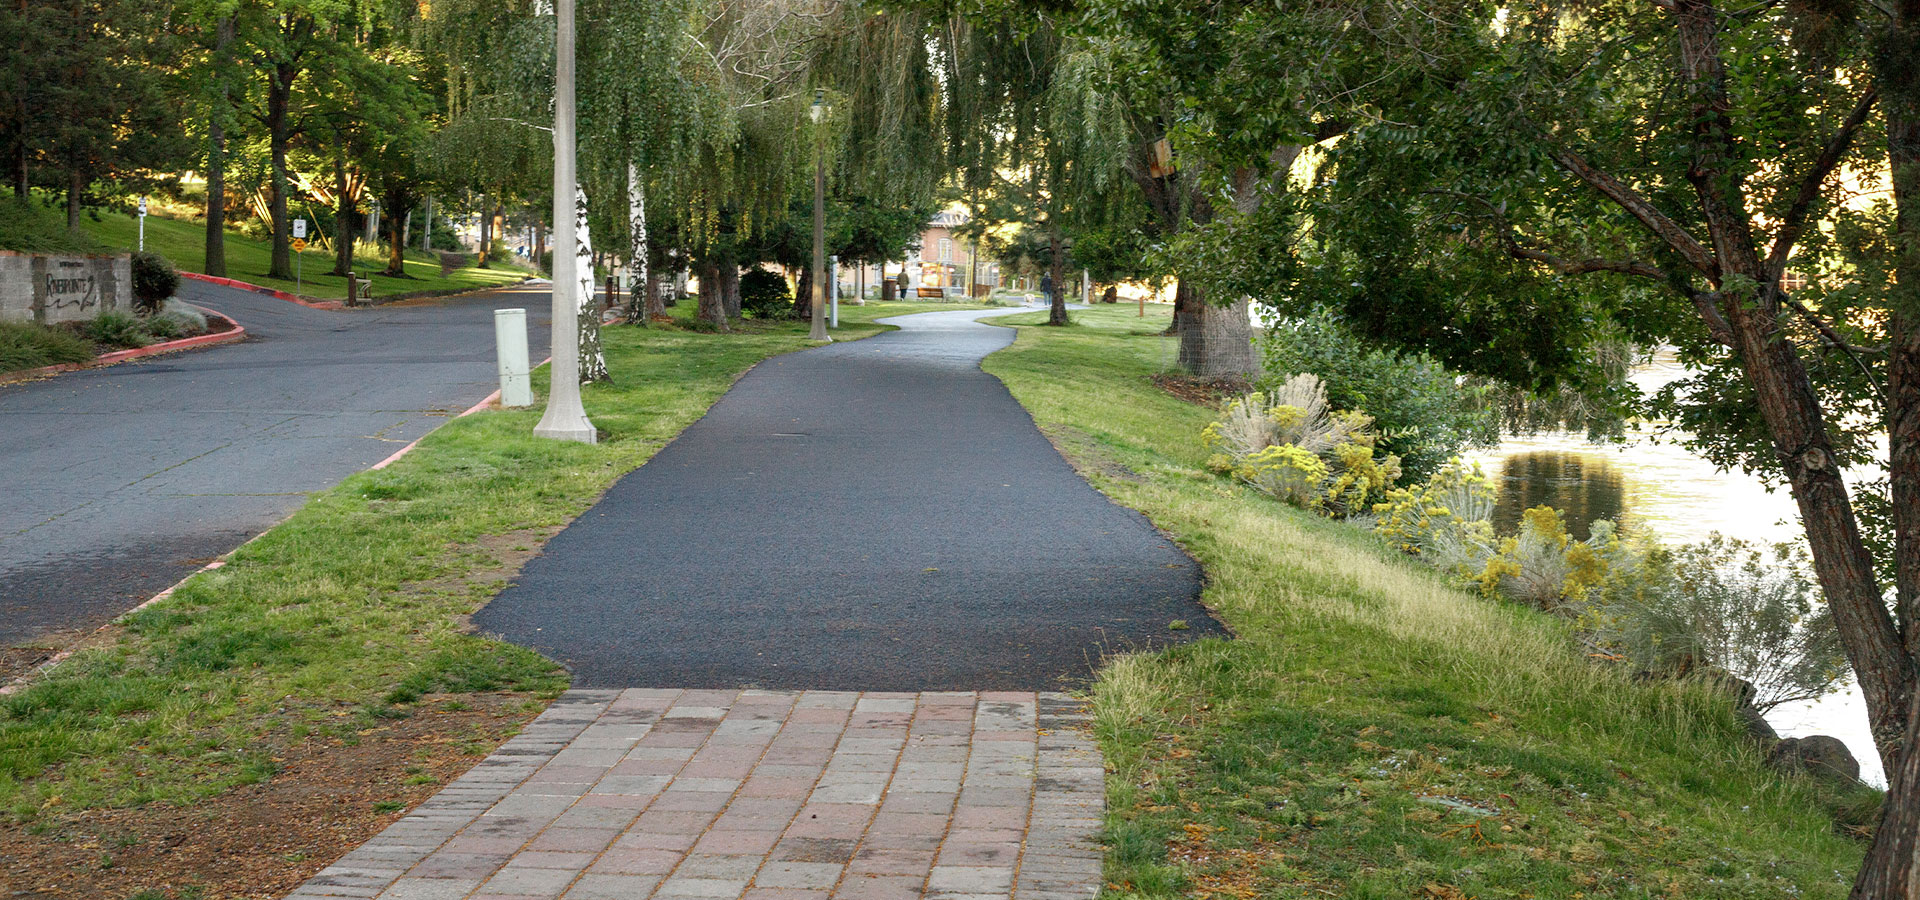 Paved and asphalt path along the grassy riverbank at Pacific Park